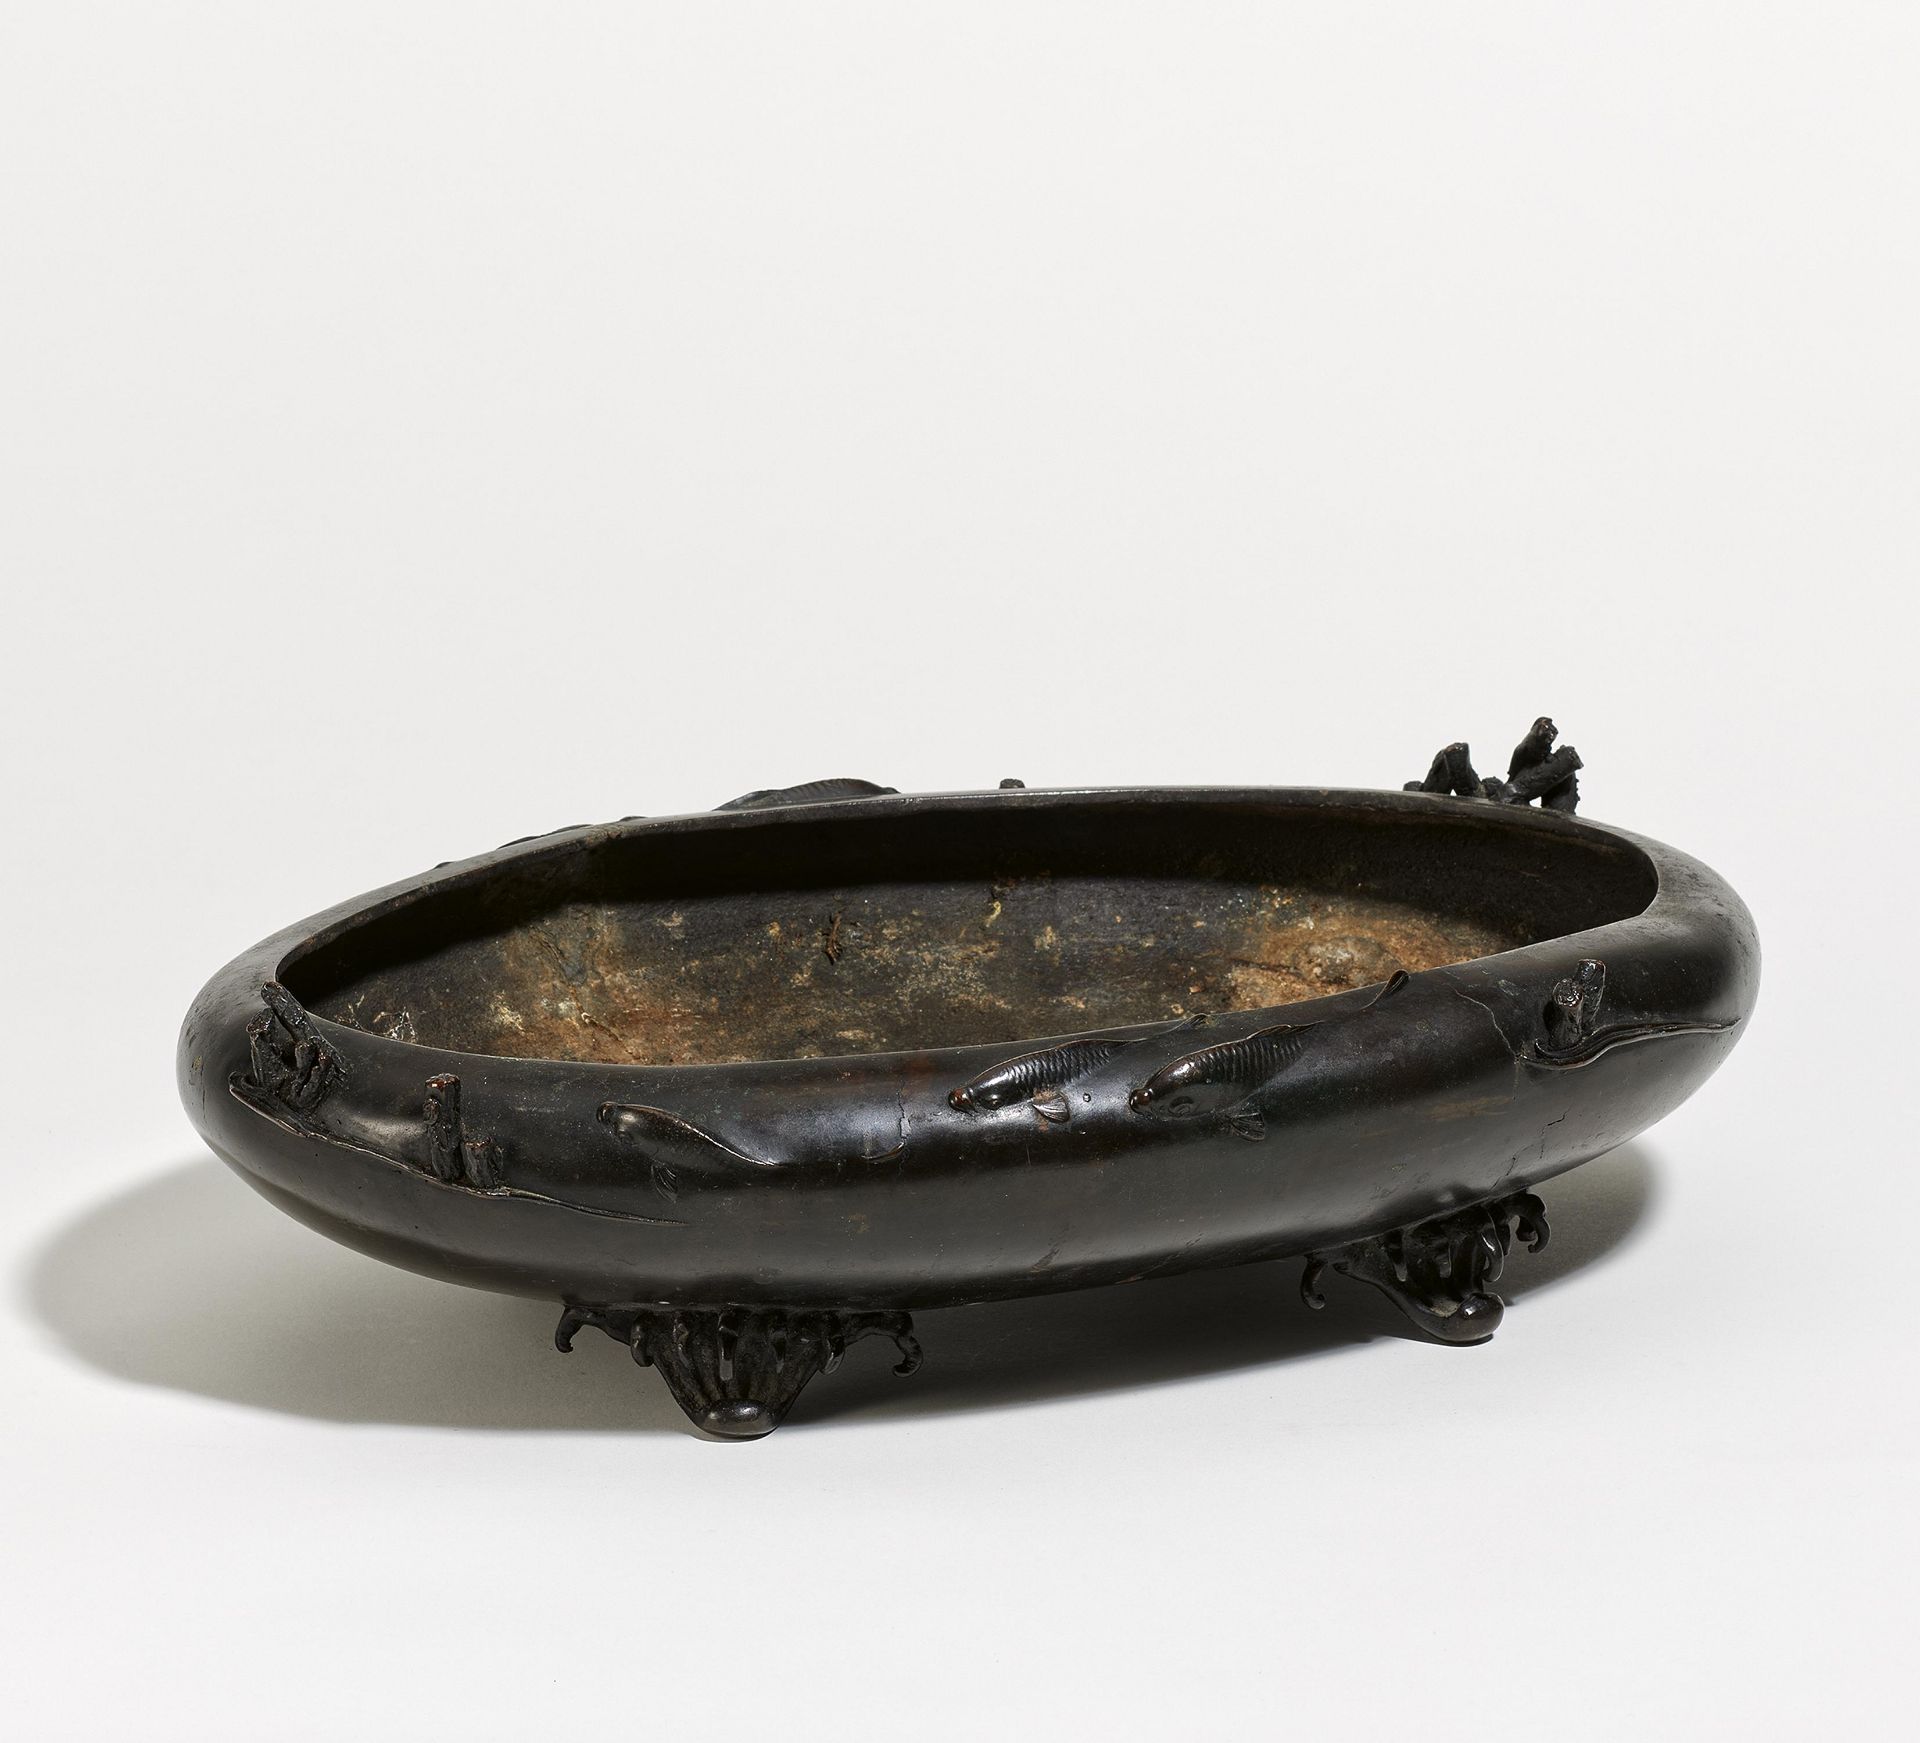 OVAL BOWL WITH CARP AND WAVES. Origin: Japan. Dynasty: Meiji period (1868-1912). Technique: Bronze